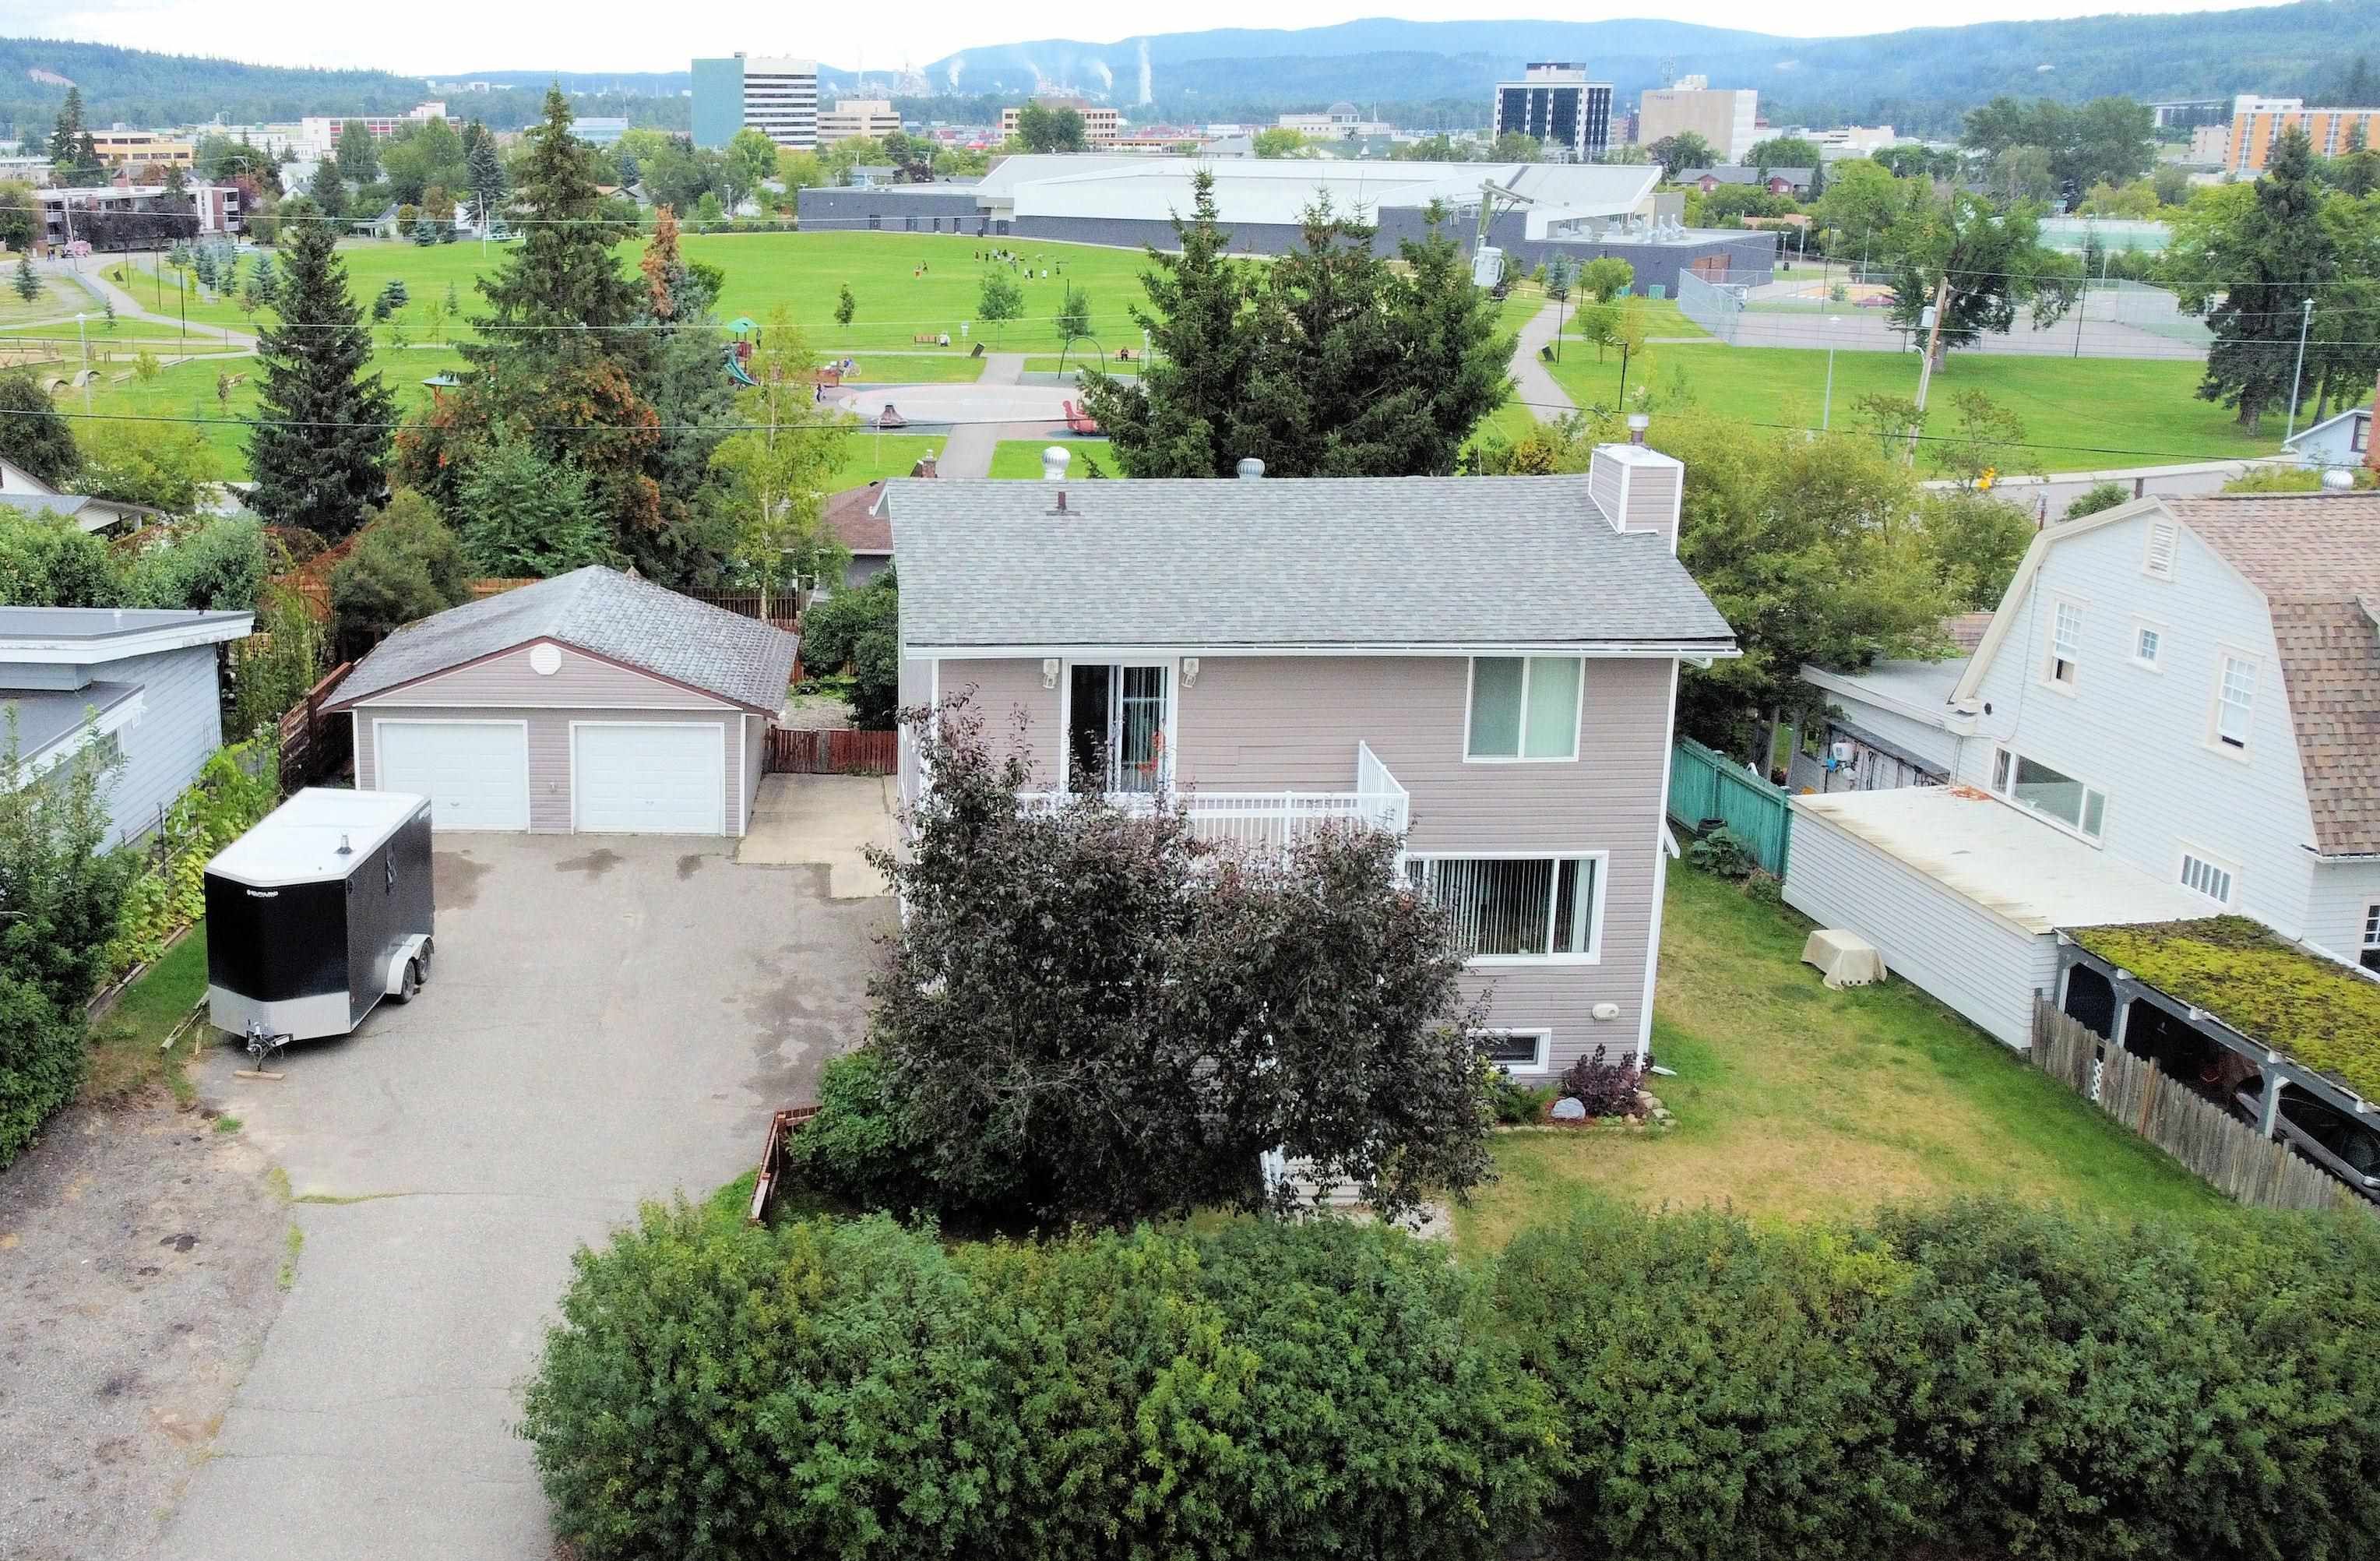 Main Photo: 2365 MCBRIDE Crescent in Prince George: Crescents Triplex for sale (PG City Central)  : MLS®# R2720740